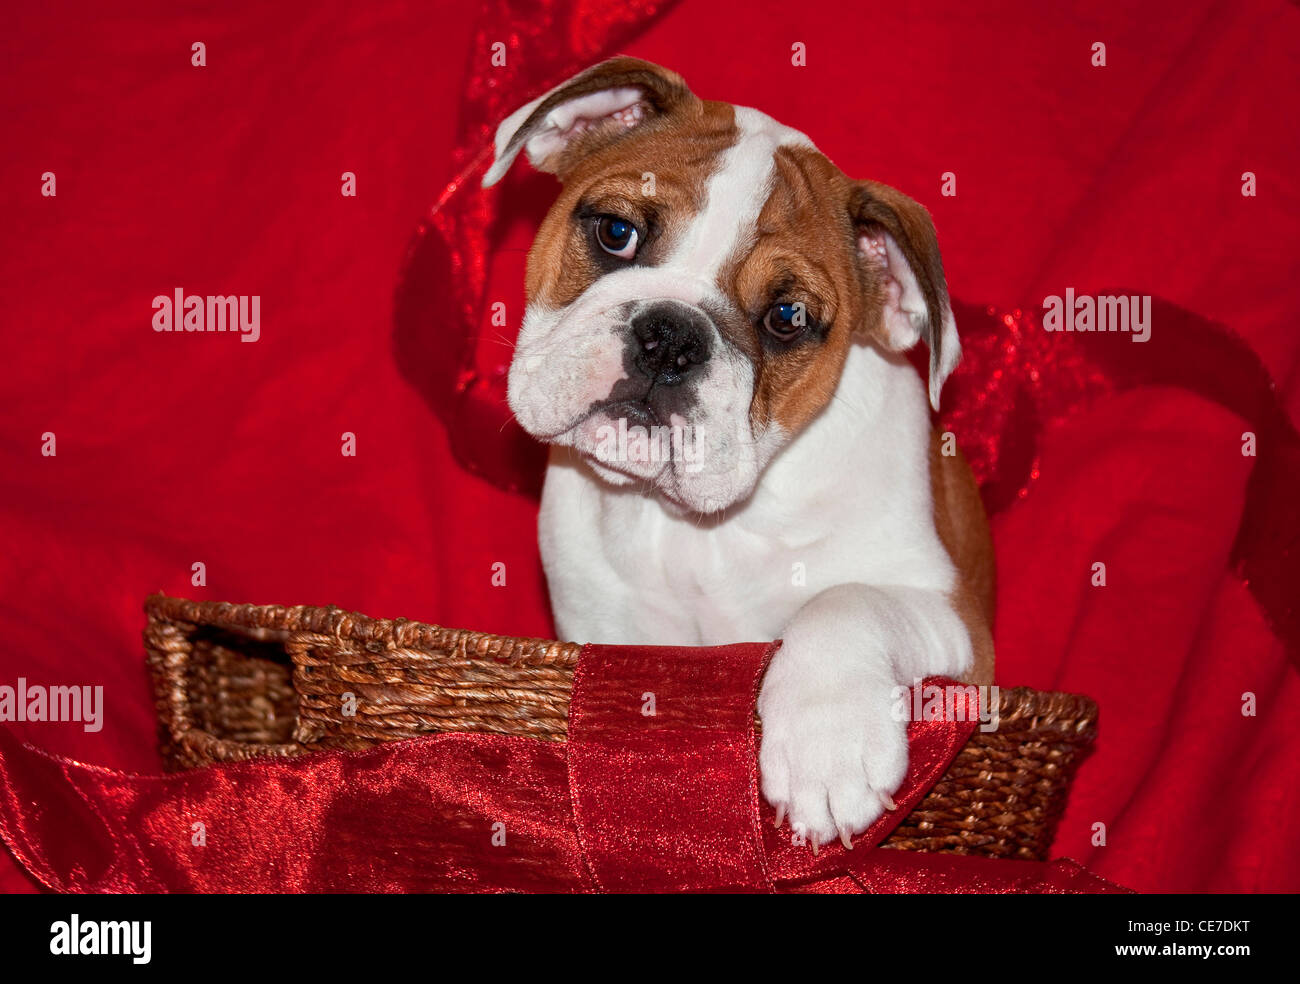 An English Bulldog puppy in a wicker basket with red ribbon and red fabric background Stock Photo